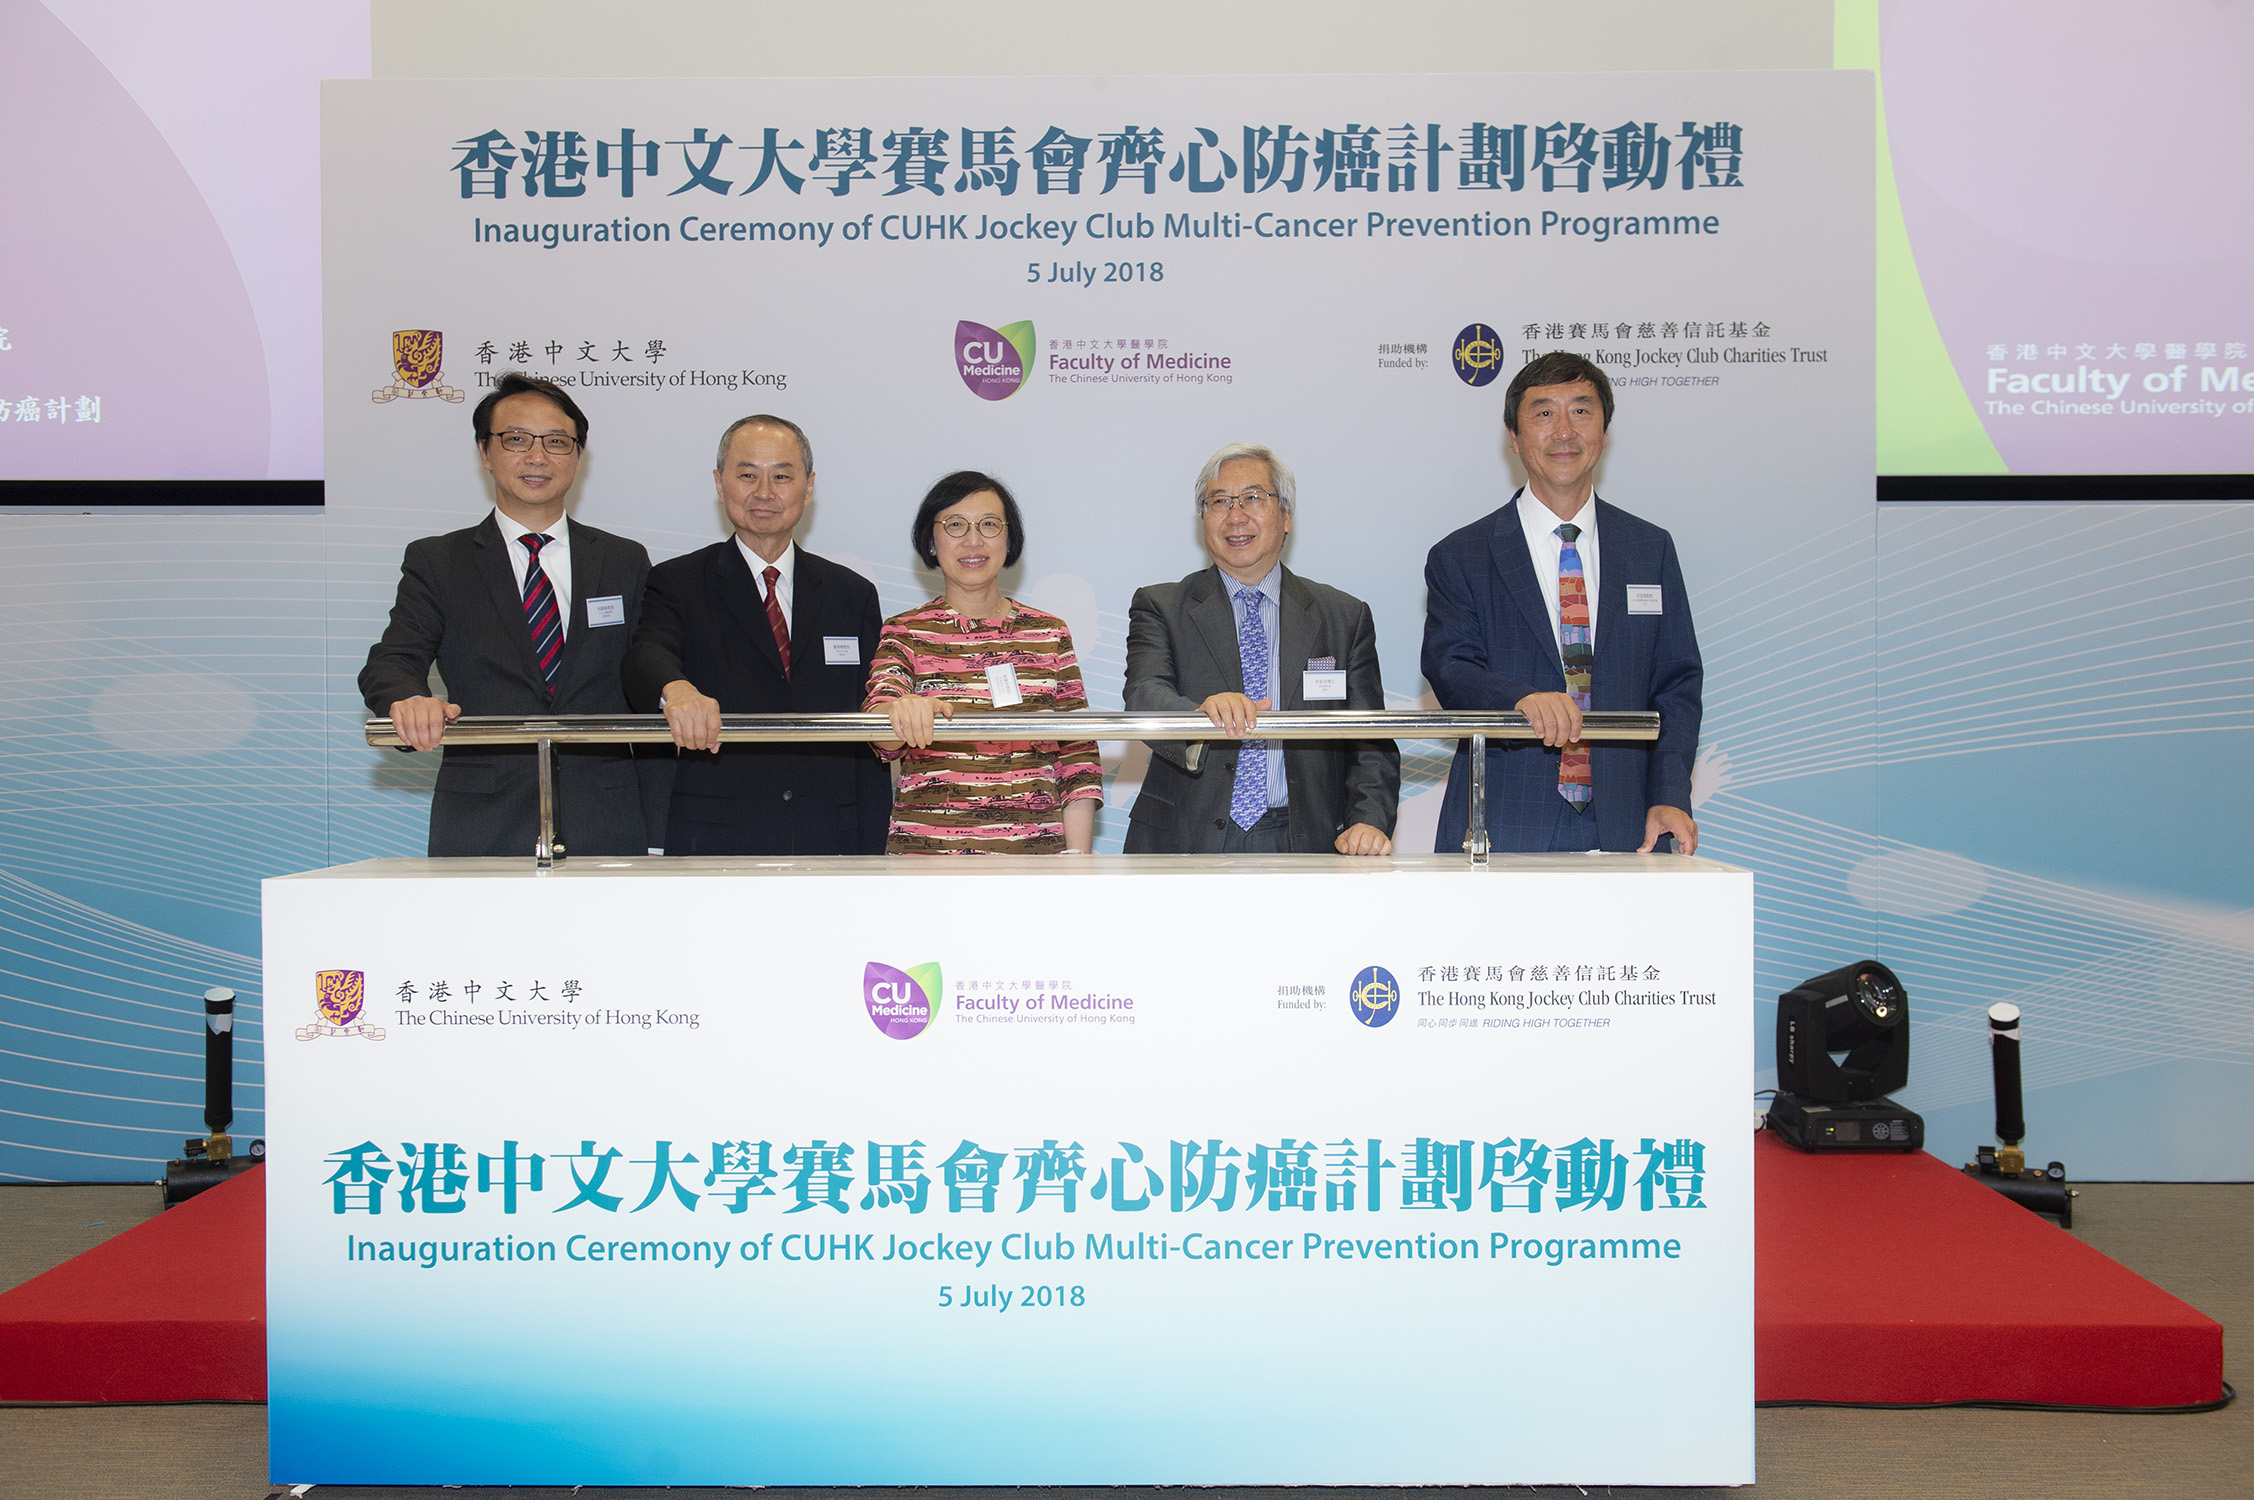  “CUHK Jockey Club Multi-Cancer Prevention Programme” is officially launched to investigate the relationship between cancer and obesity. The programme will provide free-of-charge multi-cancer screening for 10,000 Hong Kong residents. Officiating guests include (from left) Professor Enders NG, Acting Dean of the Faculty of Medicine at CUHK, Professor Sophia CHAN, Secretary for Food and Health, the HKSAR Government; Dr. Eric LI, Steward of The Hong Kong Jockey Club; Professor FOK Tai-fai, Pro-Vice-Chancellor and Vice-President of CUHK and Professor Joseph SUNG, Director of the Programme and Mok Hing Yiu Professor of Medicine at CUHK.